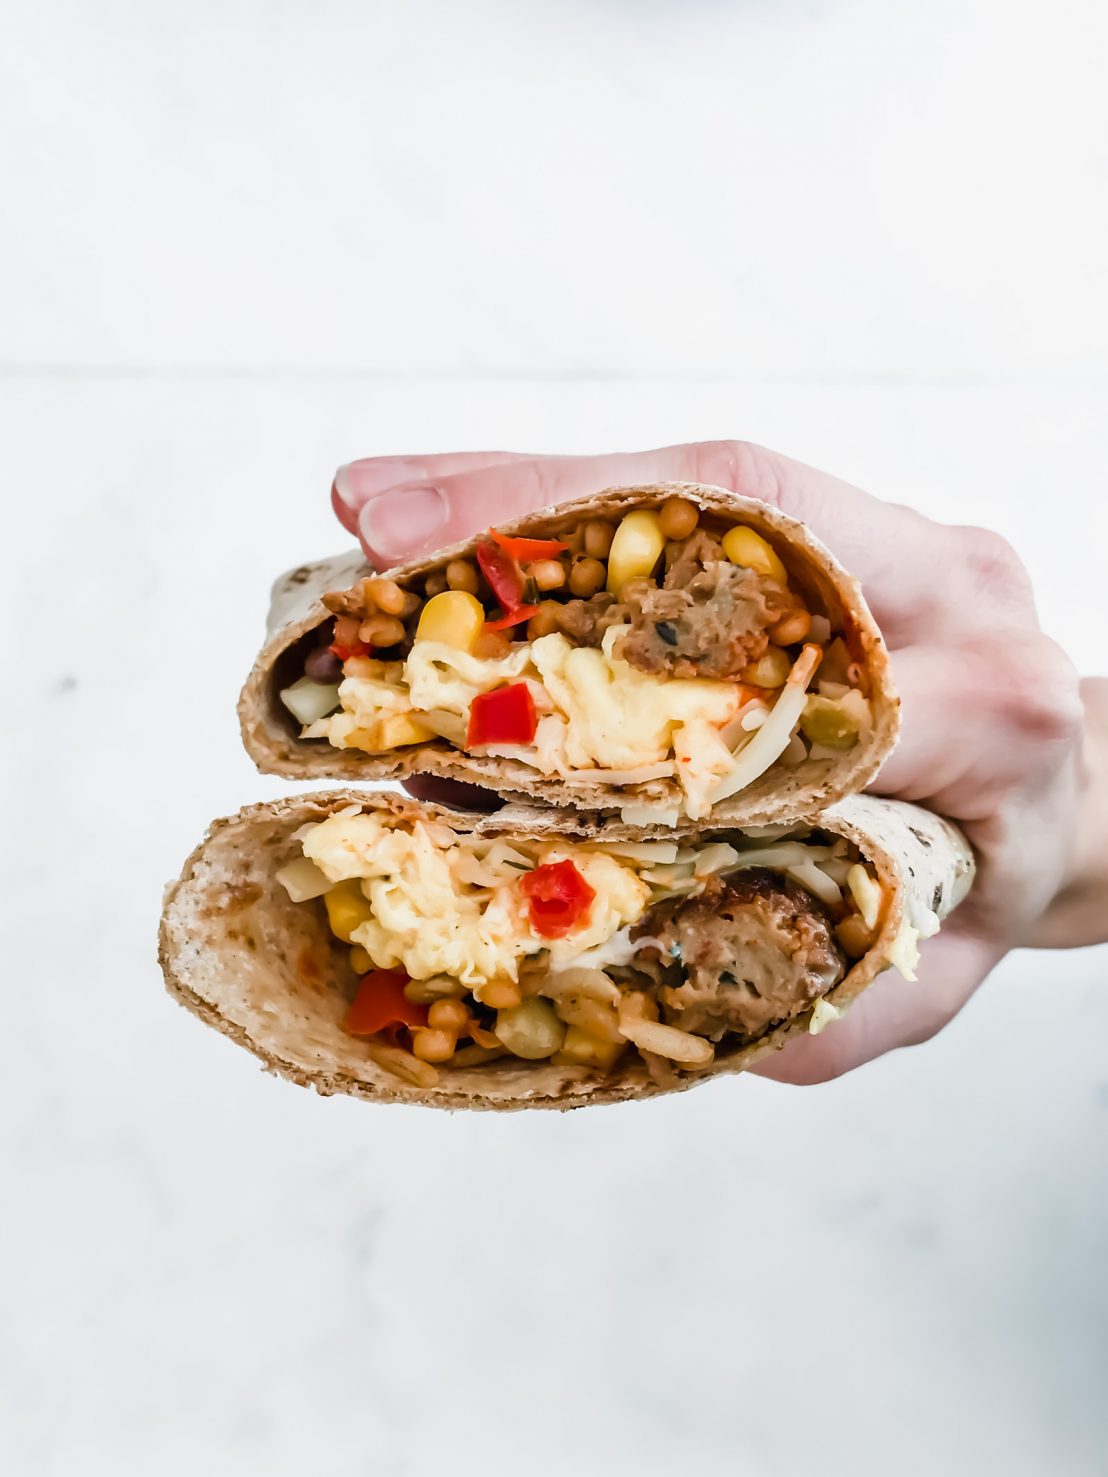 This recipe for Meal Prep Breakfast Burritos is a great make-ahead option for breakfast. They are packed with plant-based protein and full of Southwest flavor!